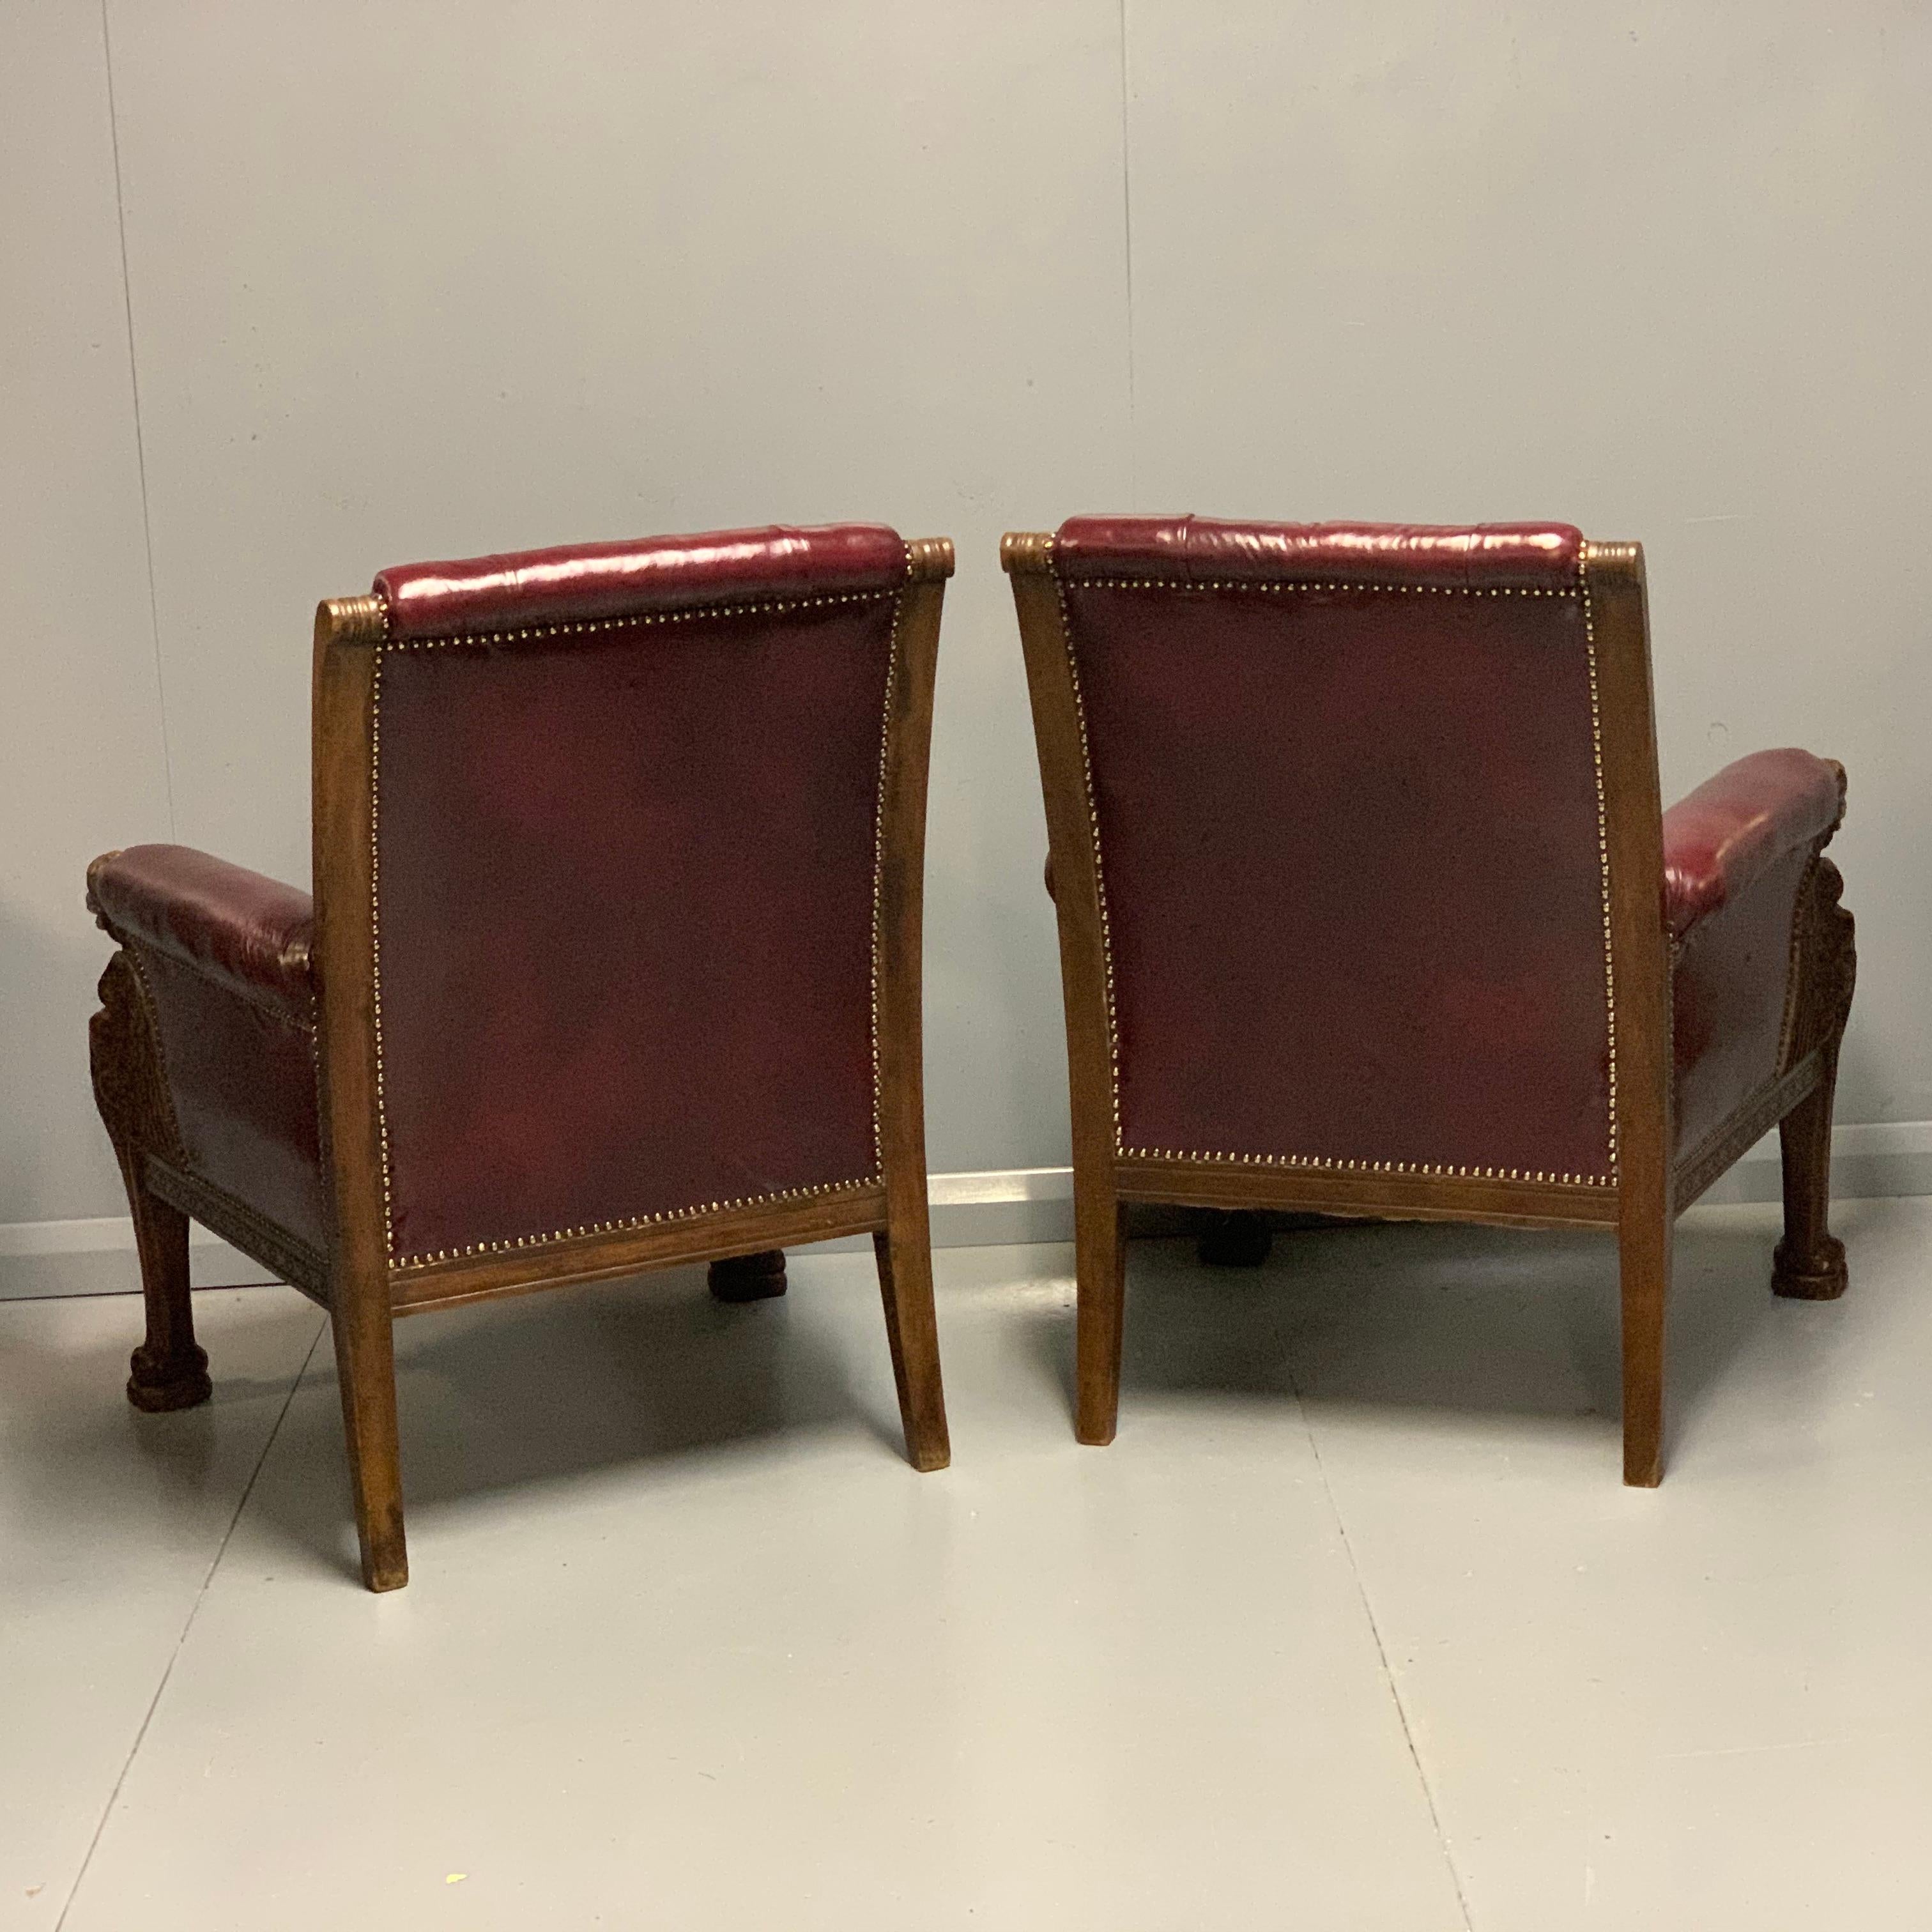 Large Pair of Mid-19th Century European Buttoned Leather Armchairs with Griffins For Sale 5